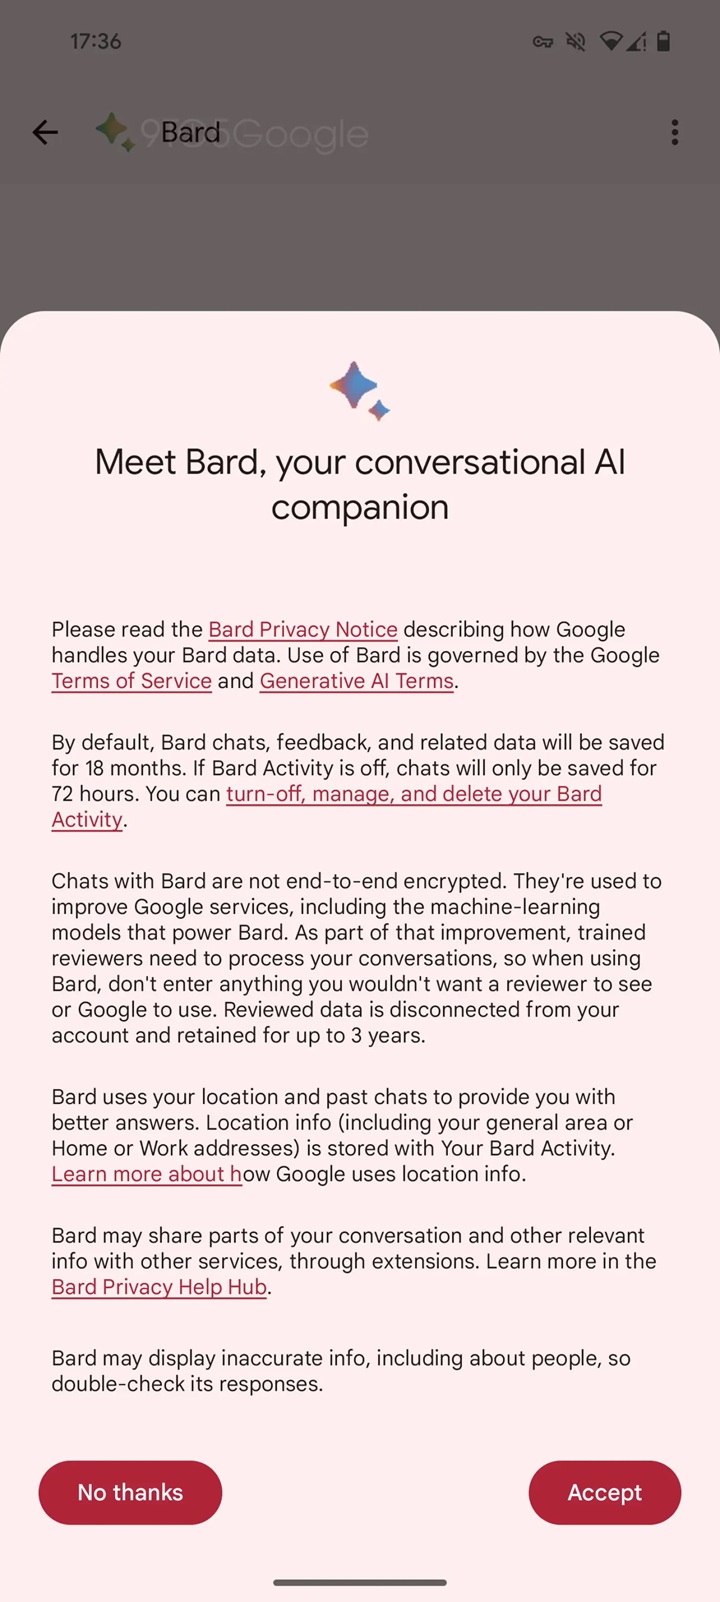 Bard terms of service in Google Messages app